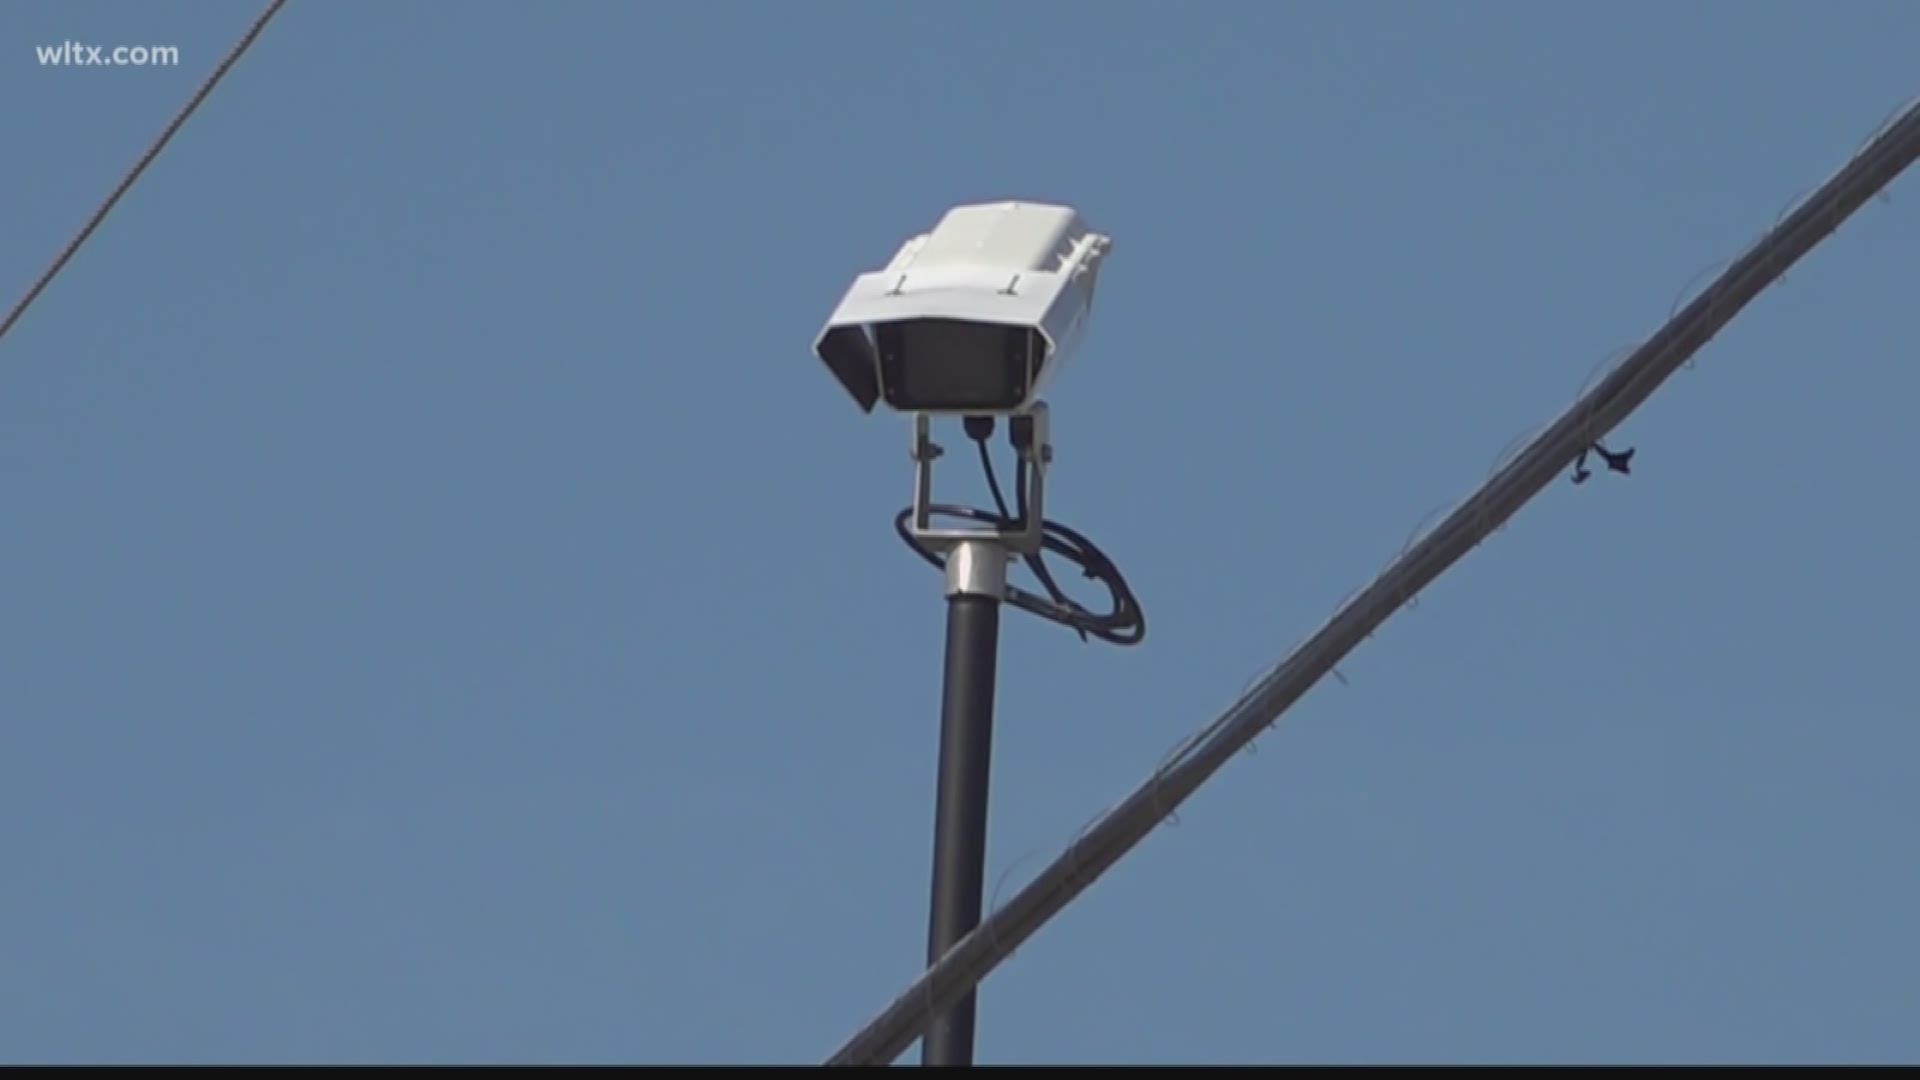 The town installed cameras around various intersections to monitor the traffic and update traffic signals as it sees fit.  Although it's been around for almost two years, the town is expanding the system and starting phase two soon.